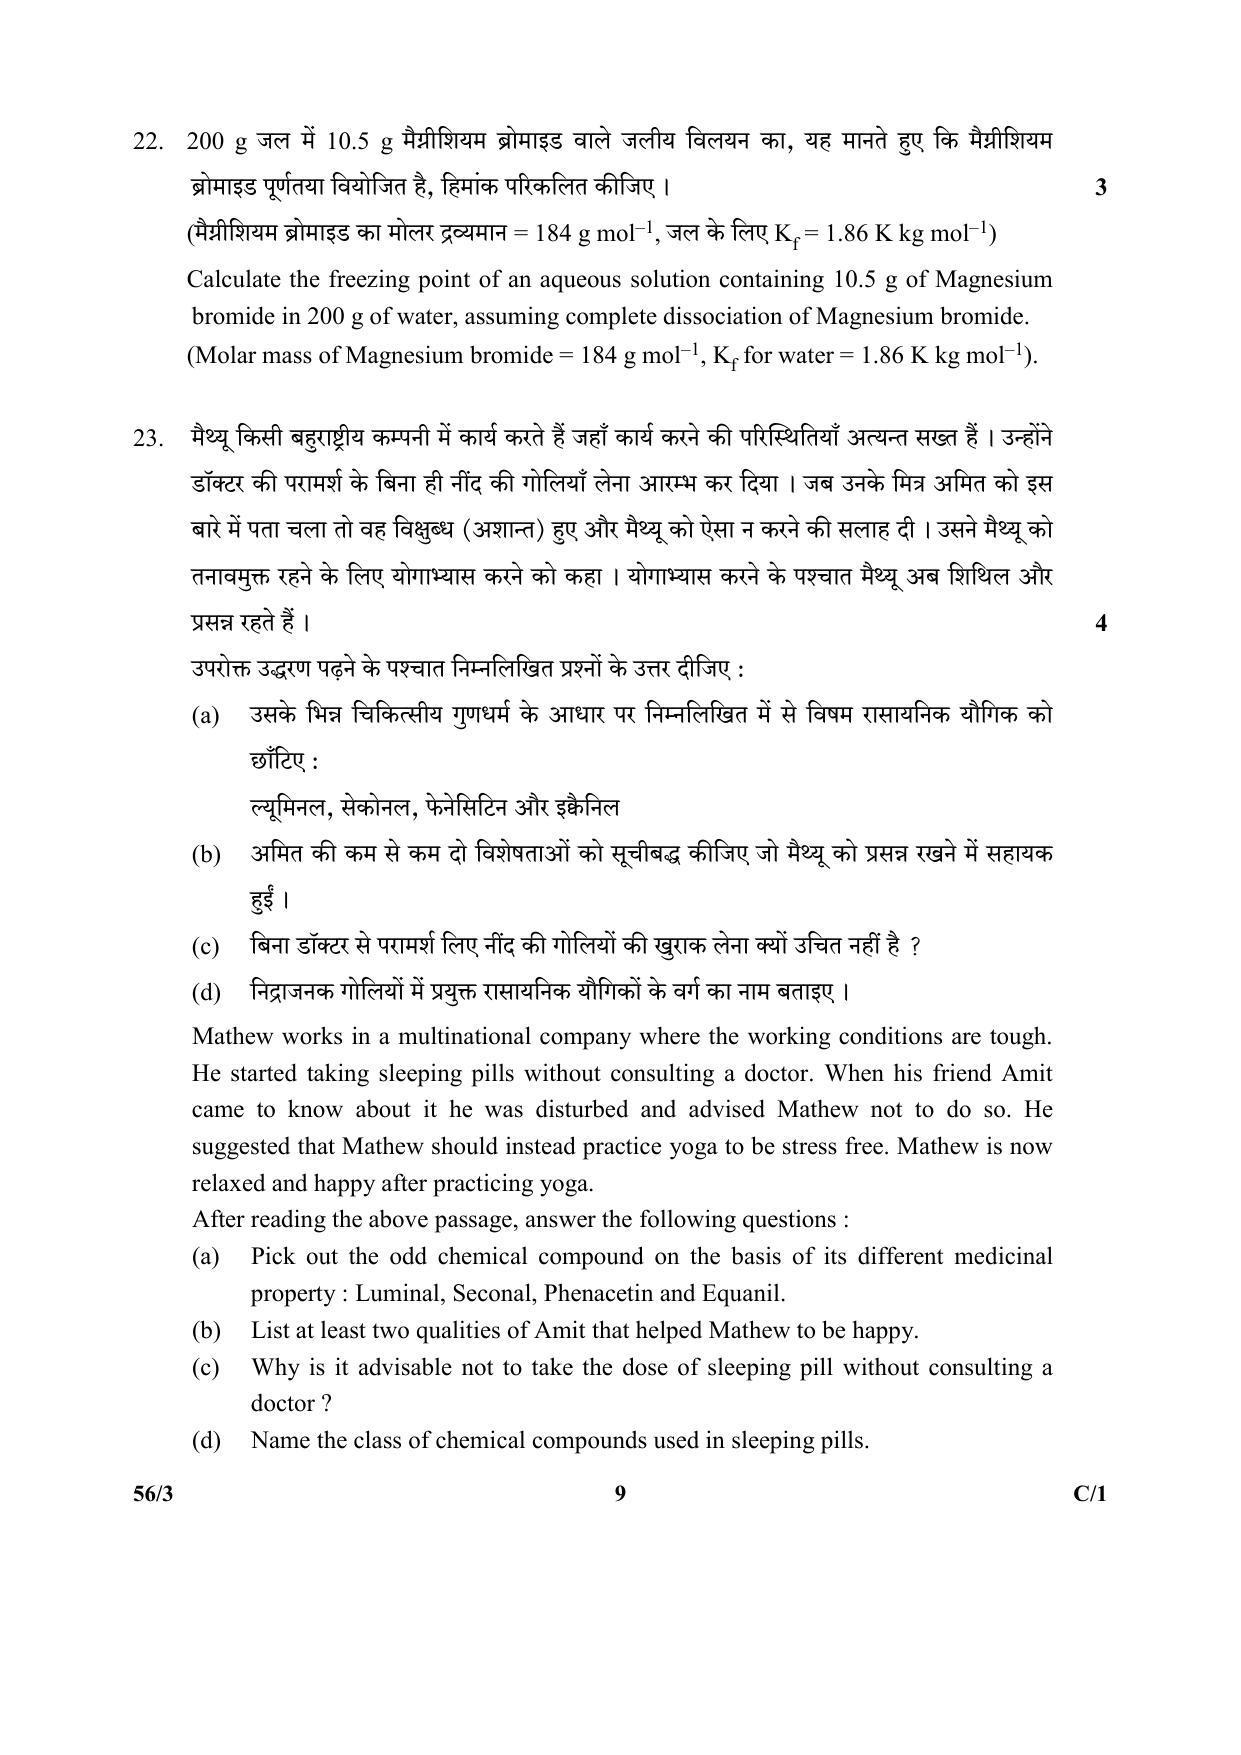 CBSE Class 12 56-3 (Chemistry) 2018 Compartment Question Paper - Page 9